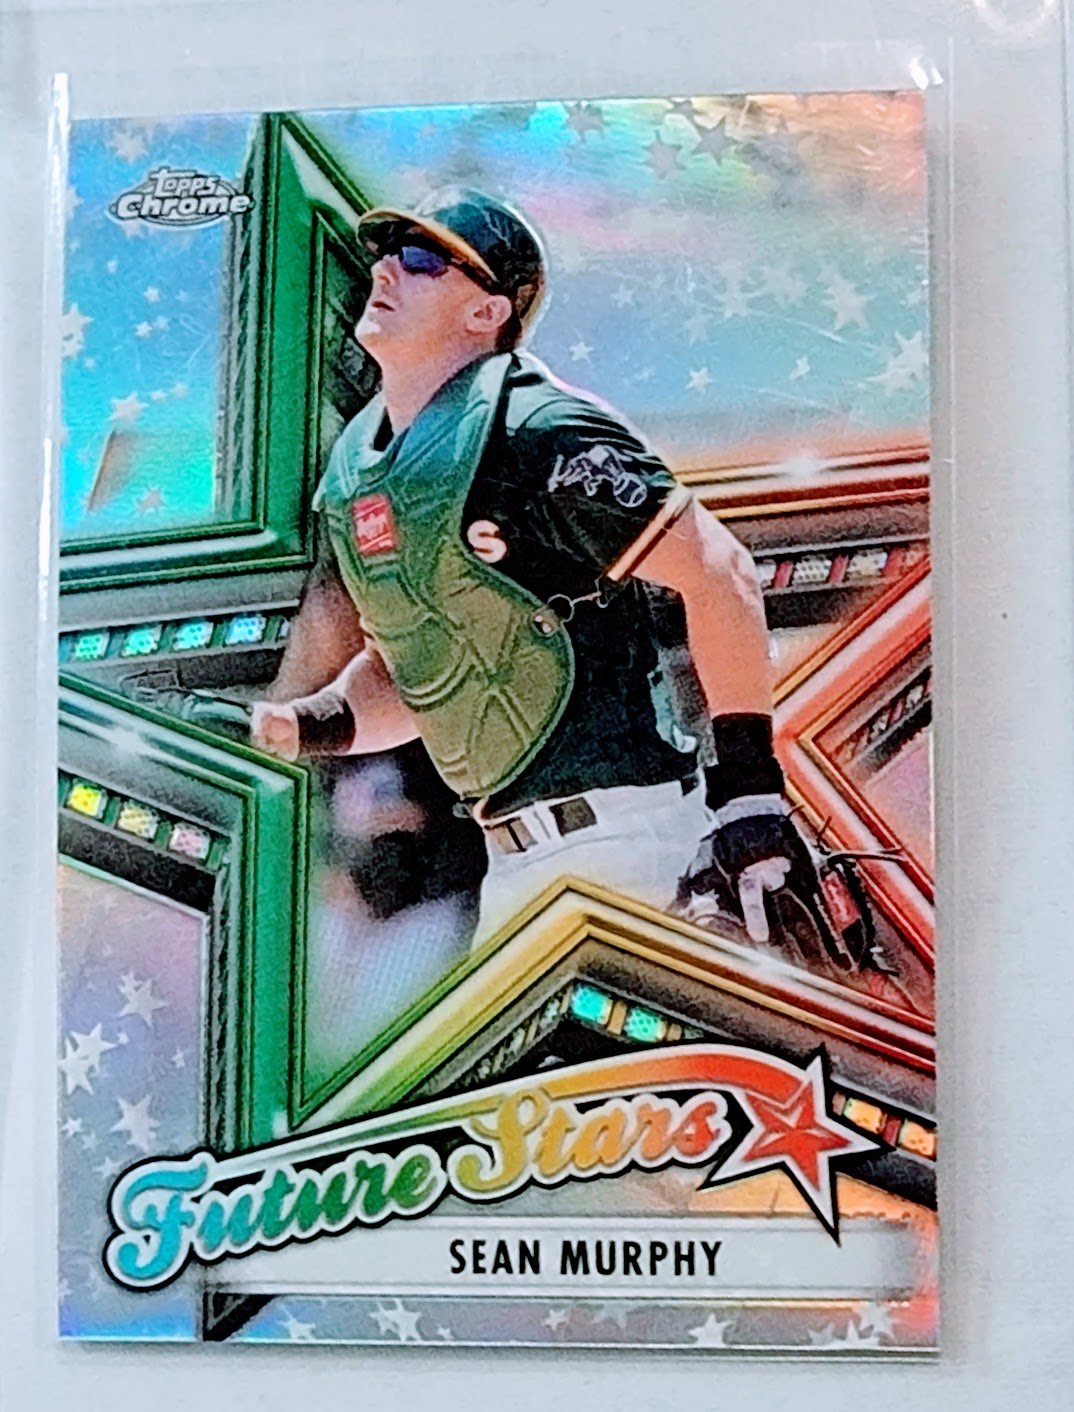 2021 Topps Chrome Sean Murphy Future Stars Refractor Baseball Trading Card TPTV simple Xclusive Collectibles   